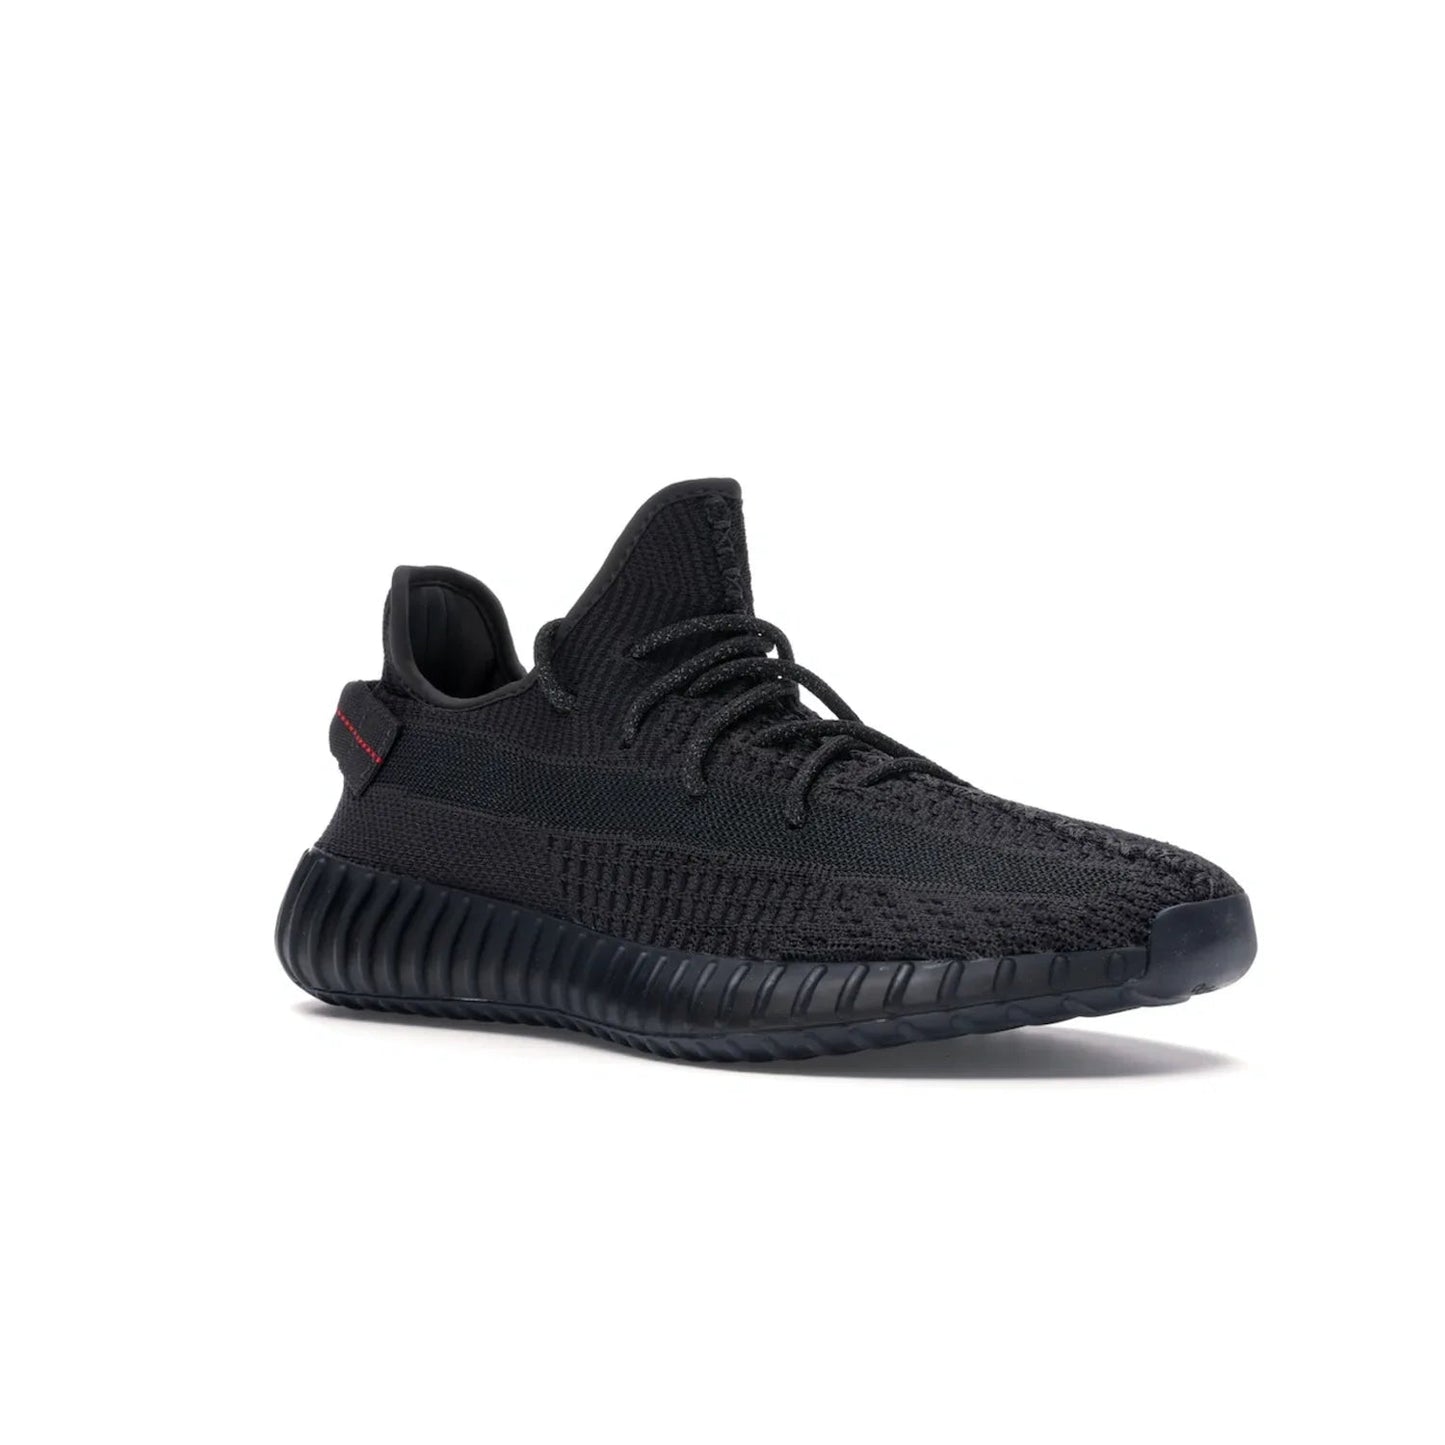 adidas Yeezy Boost 350 V2 Black (Non-Reflective) - Image 5 - Only at www.BallersClubKickz.com - A timeless, sleek silhouette crafted from quality materials. The adidas Yeezy Boost 350 V2 Black (Non-Reflective) brings style and sophistication. Get yours now!